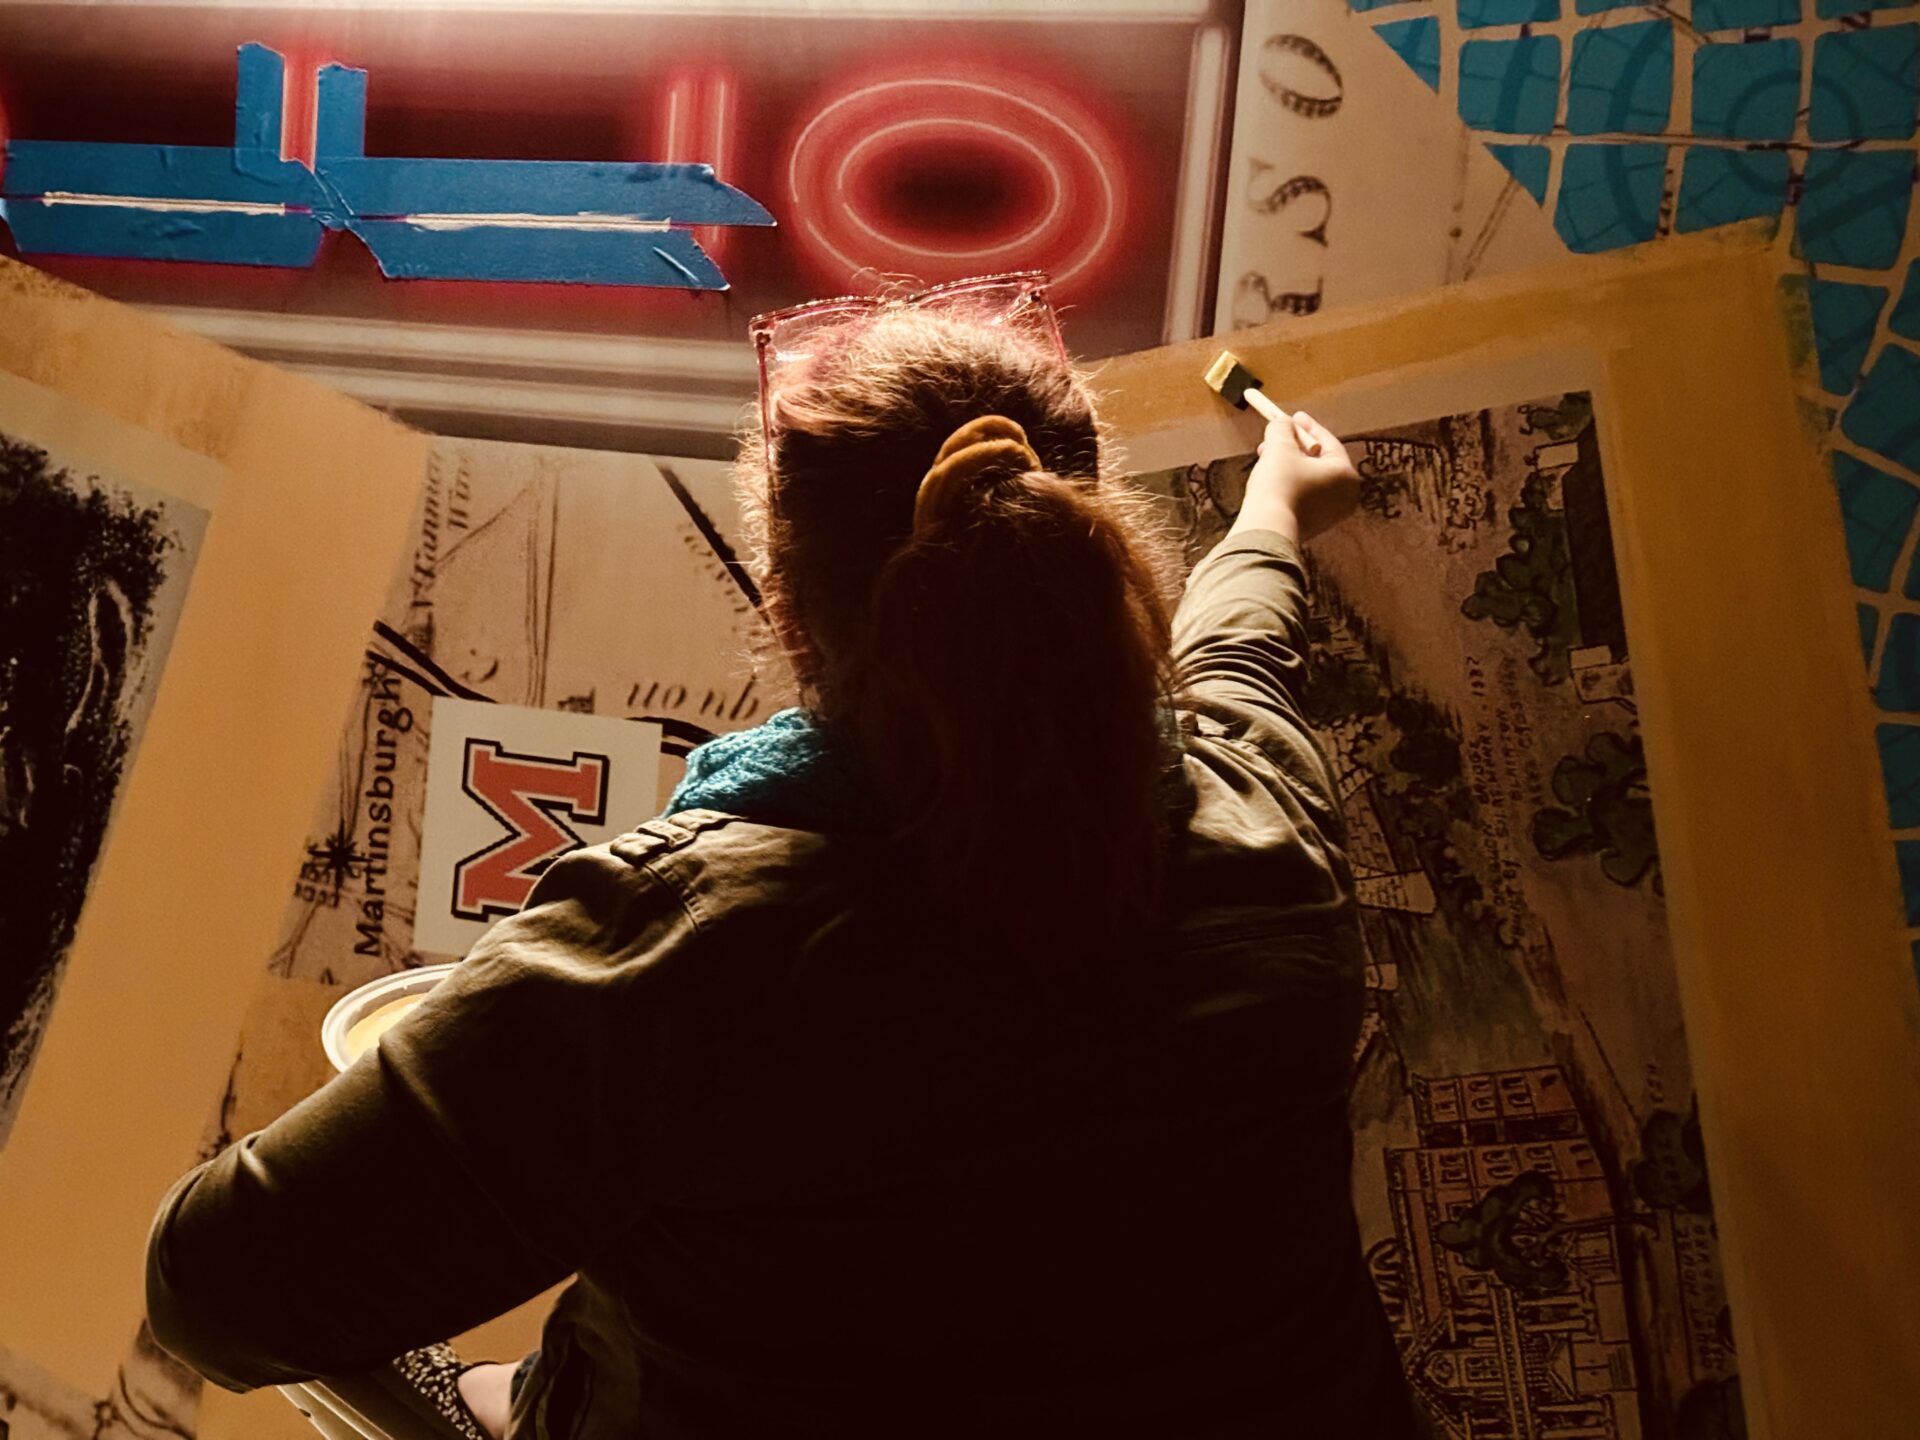 A woman with a scarf paints a portion of a mural.